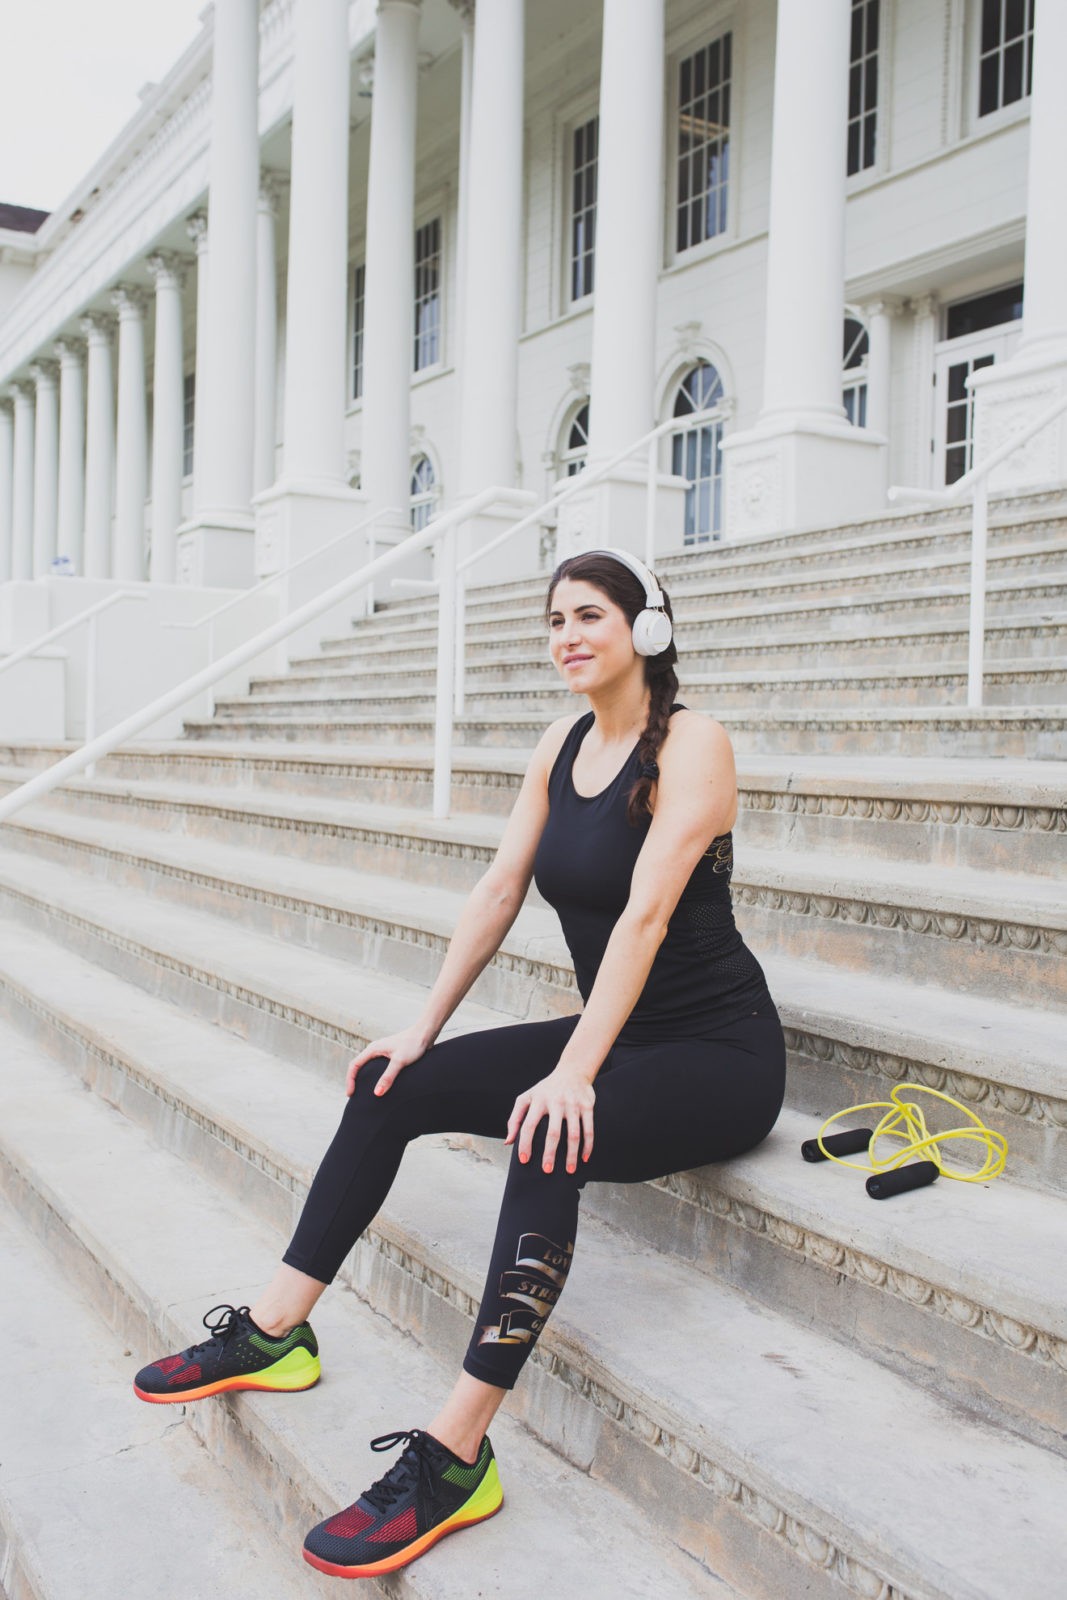 My Fitness Journey and Tips for a Healthier Lifestyle by popular Los Angeles lifestyle blogger, Laura Lily, 